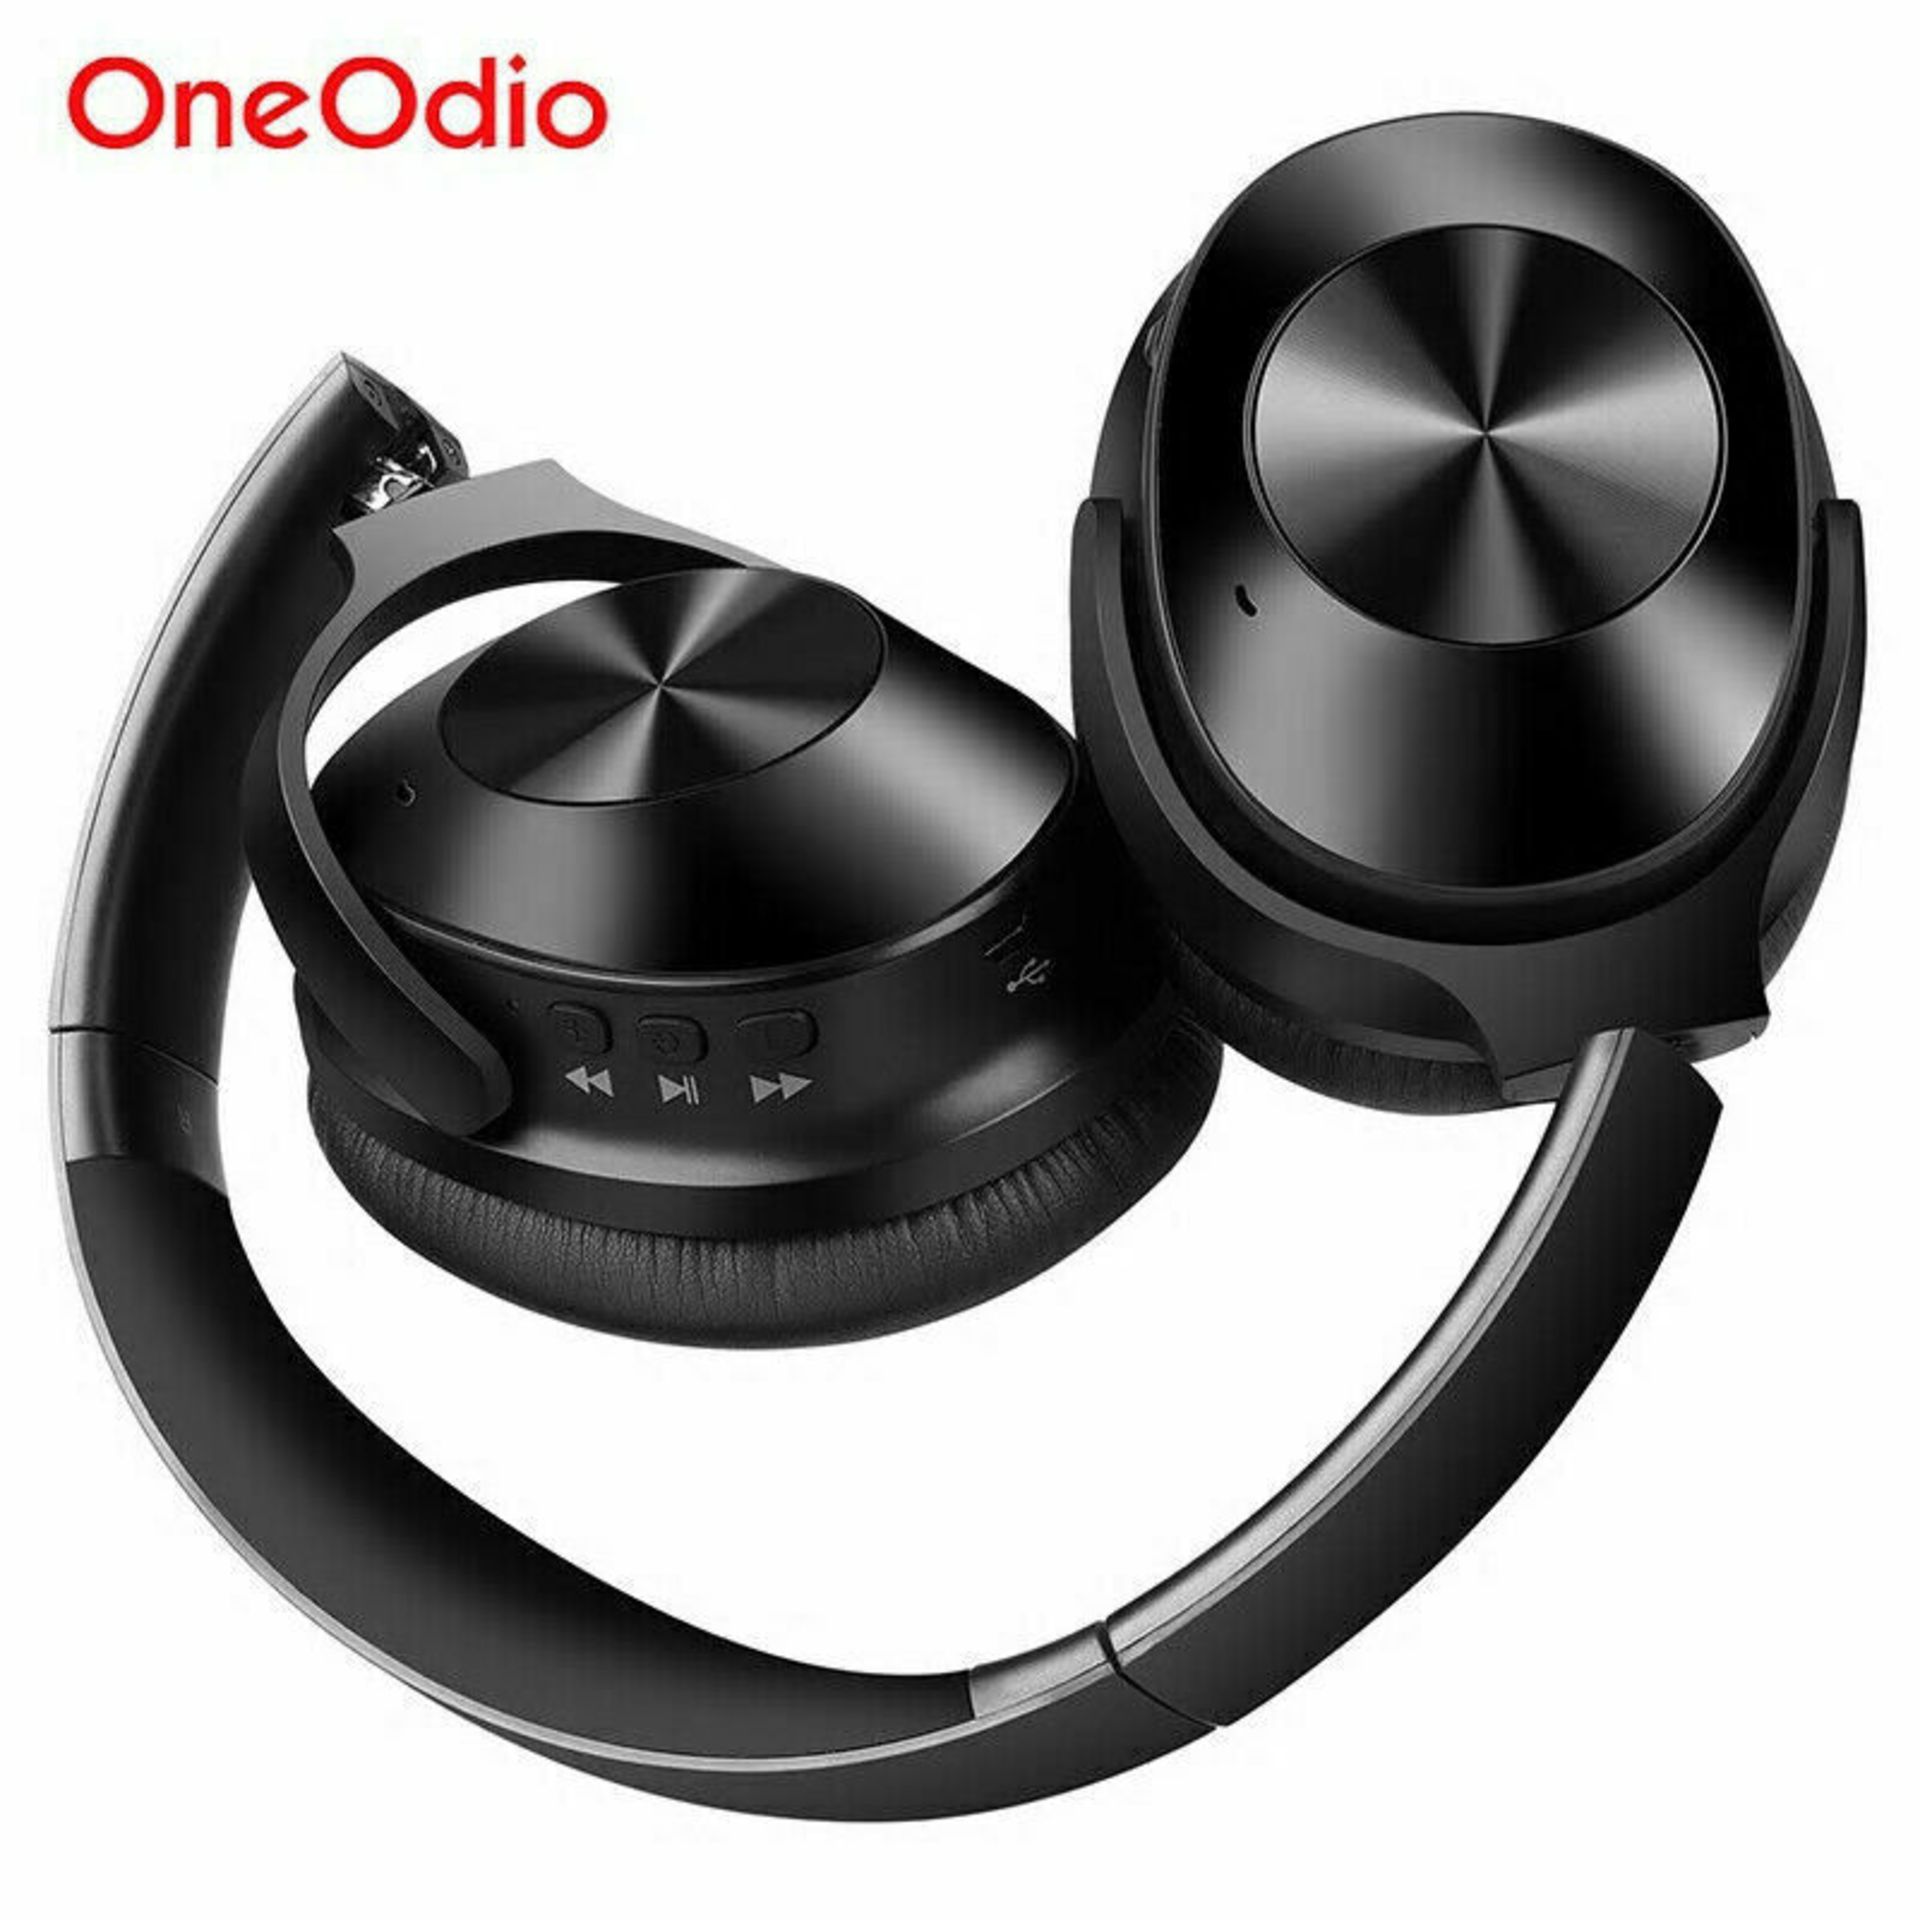 Oneaudio A9 Traveller ANC Bluetooth Headphone - Image 5 of 7